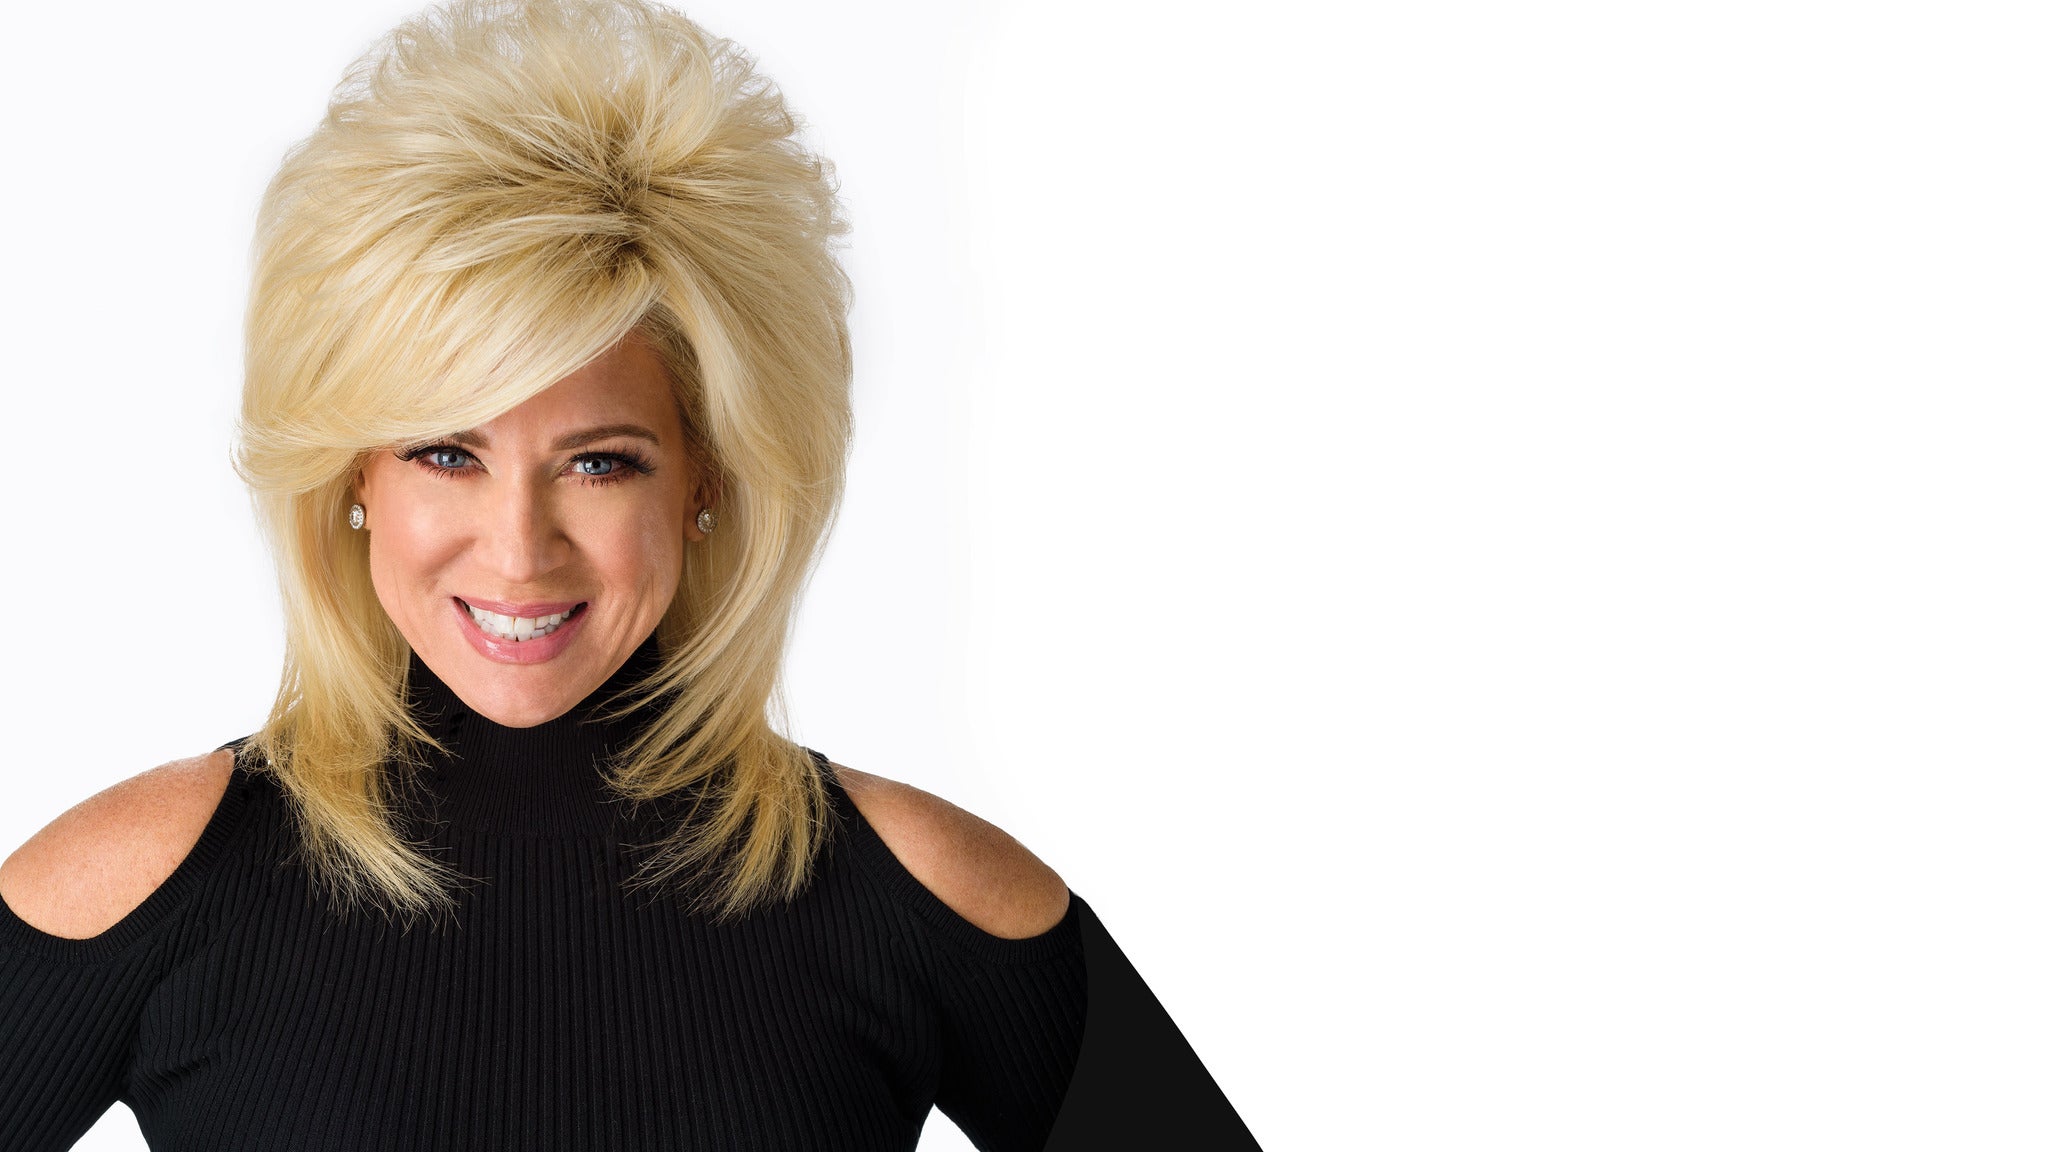 presale code for Theresa Caputo Live! The Experience tickets in Bloomington - IN (Indiana University Auditorium)